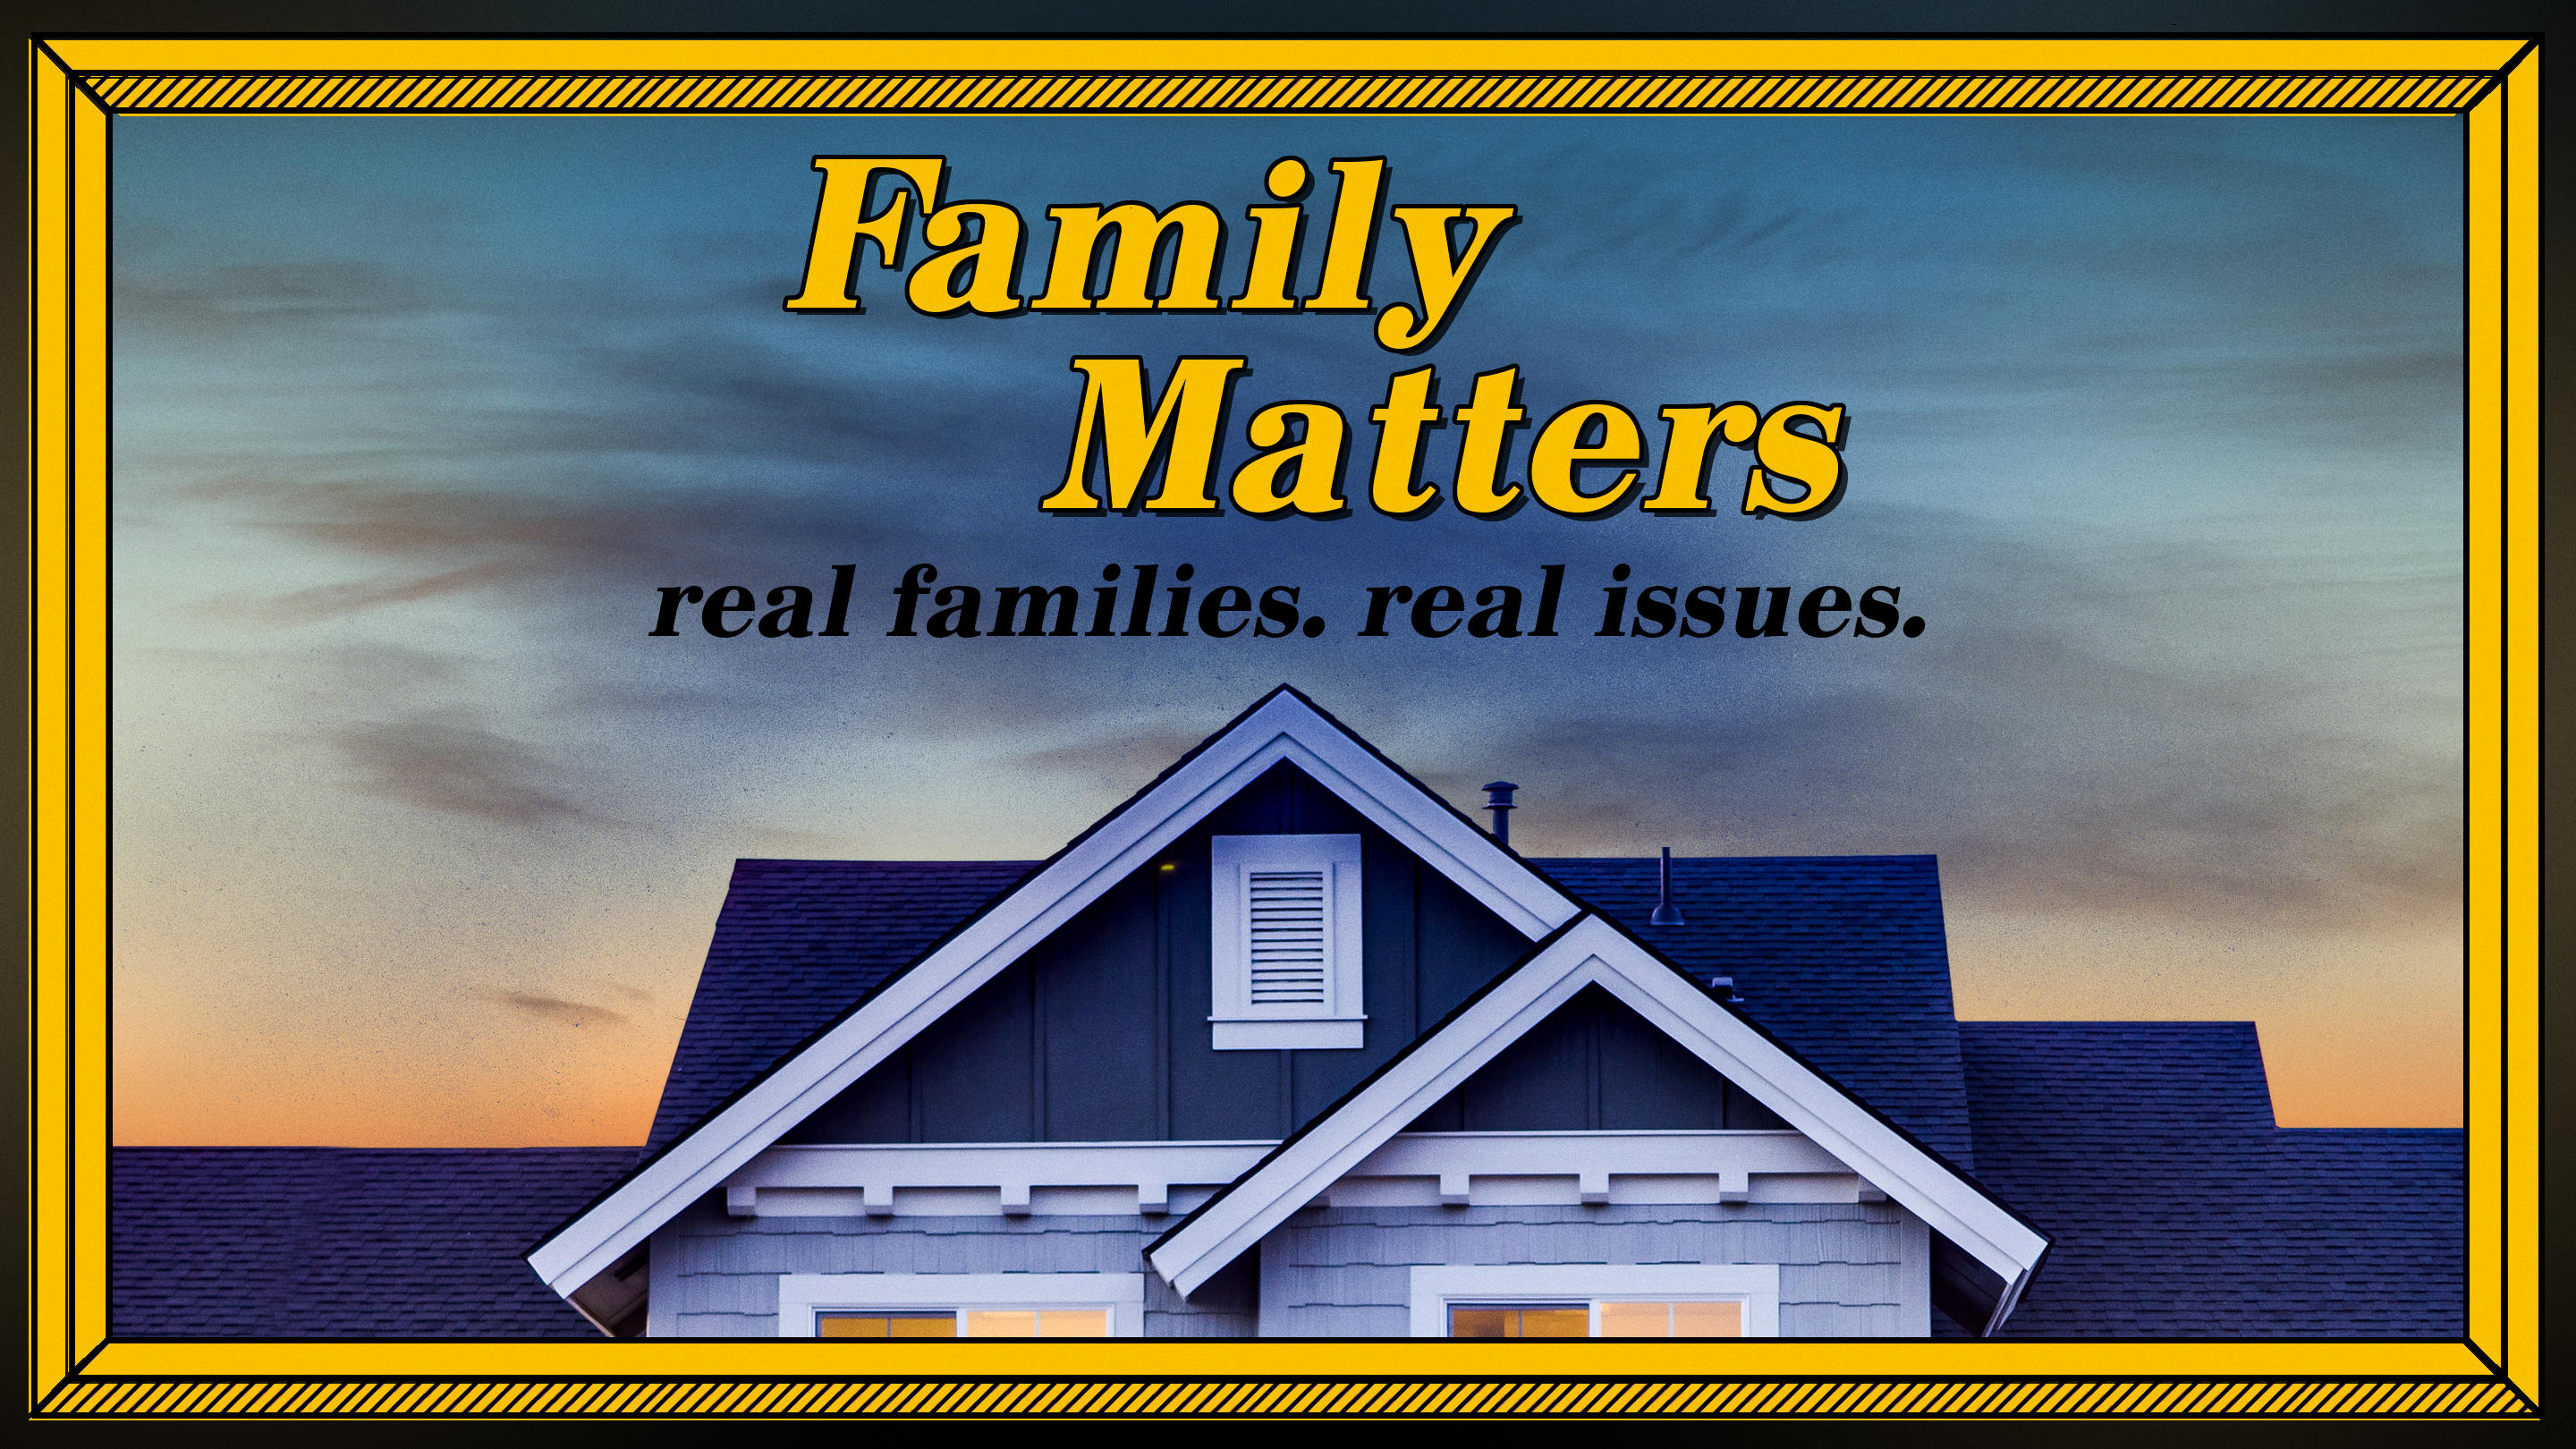 FAMILY MATTERS | real families. real issues. // REAL Help